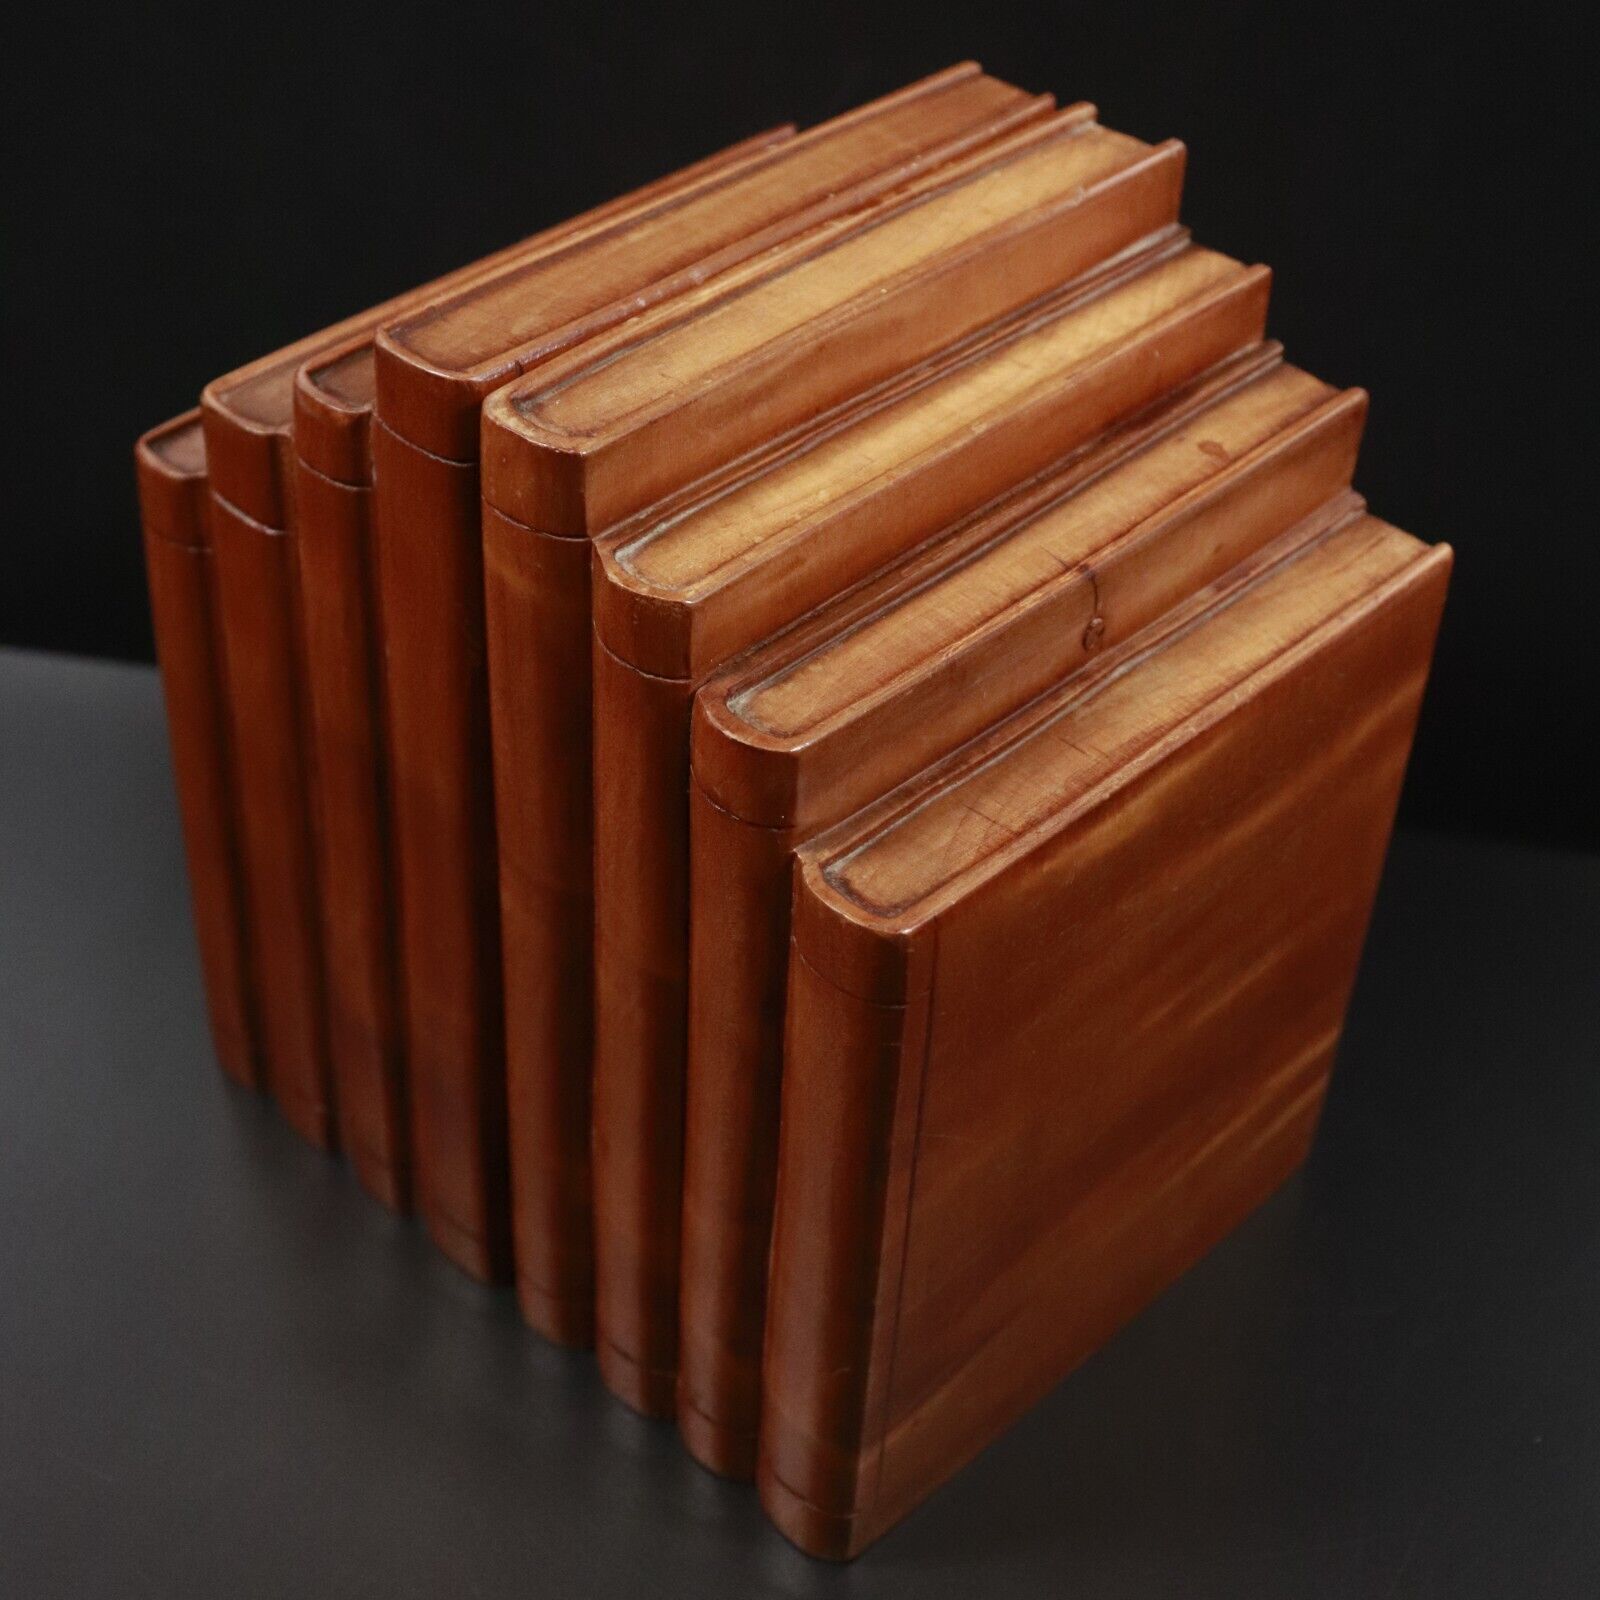 c1930's Art Deco Style Book Ends Antique Flamed Queensland Maple Bookends